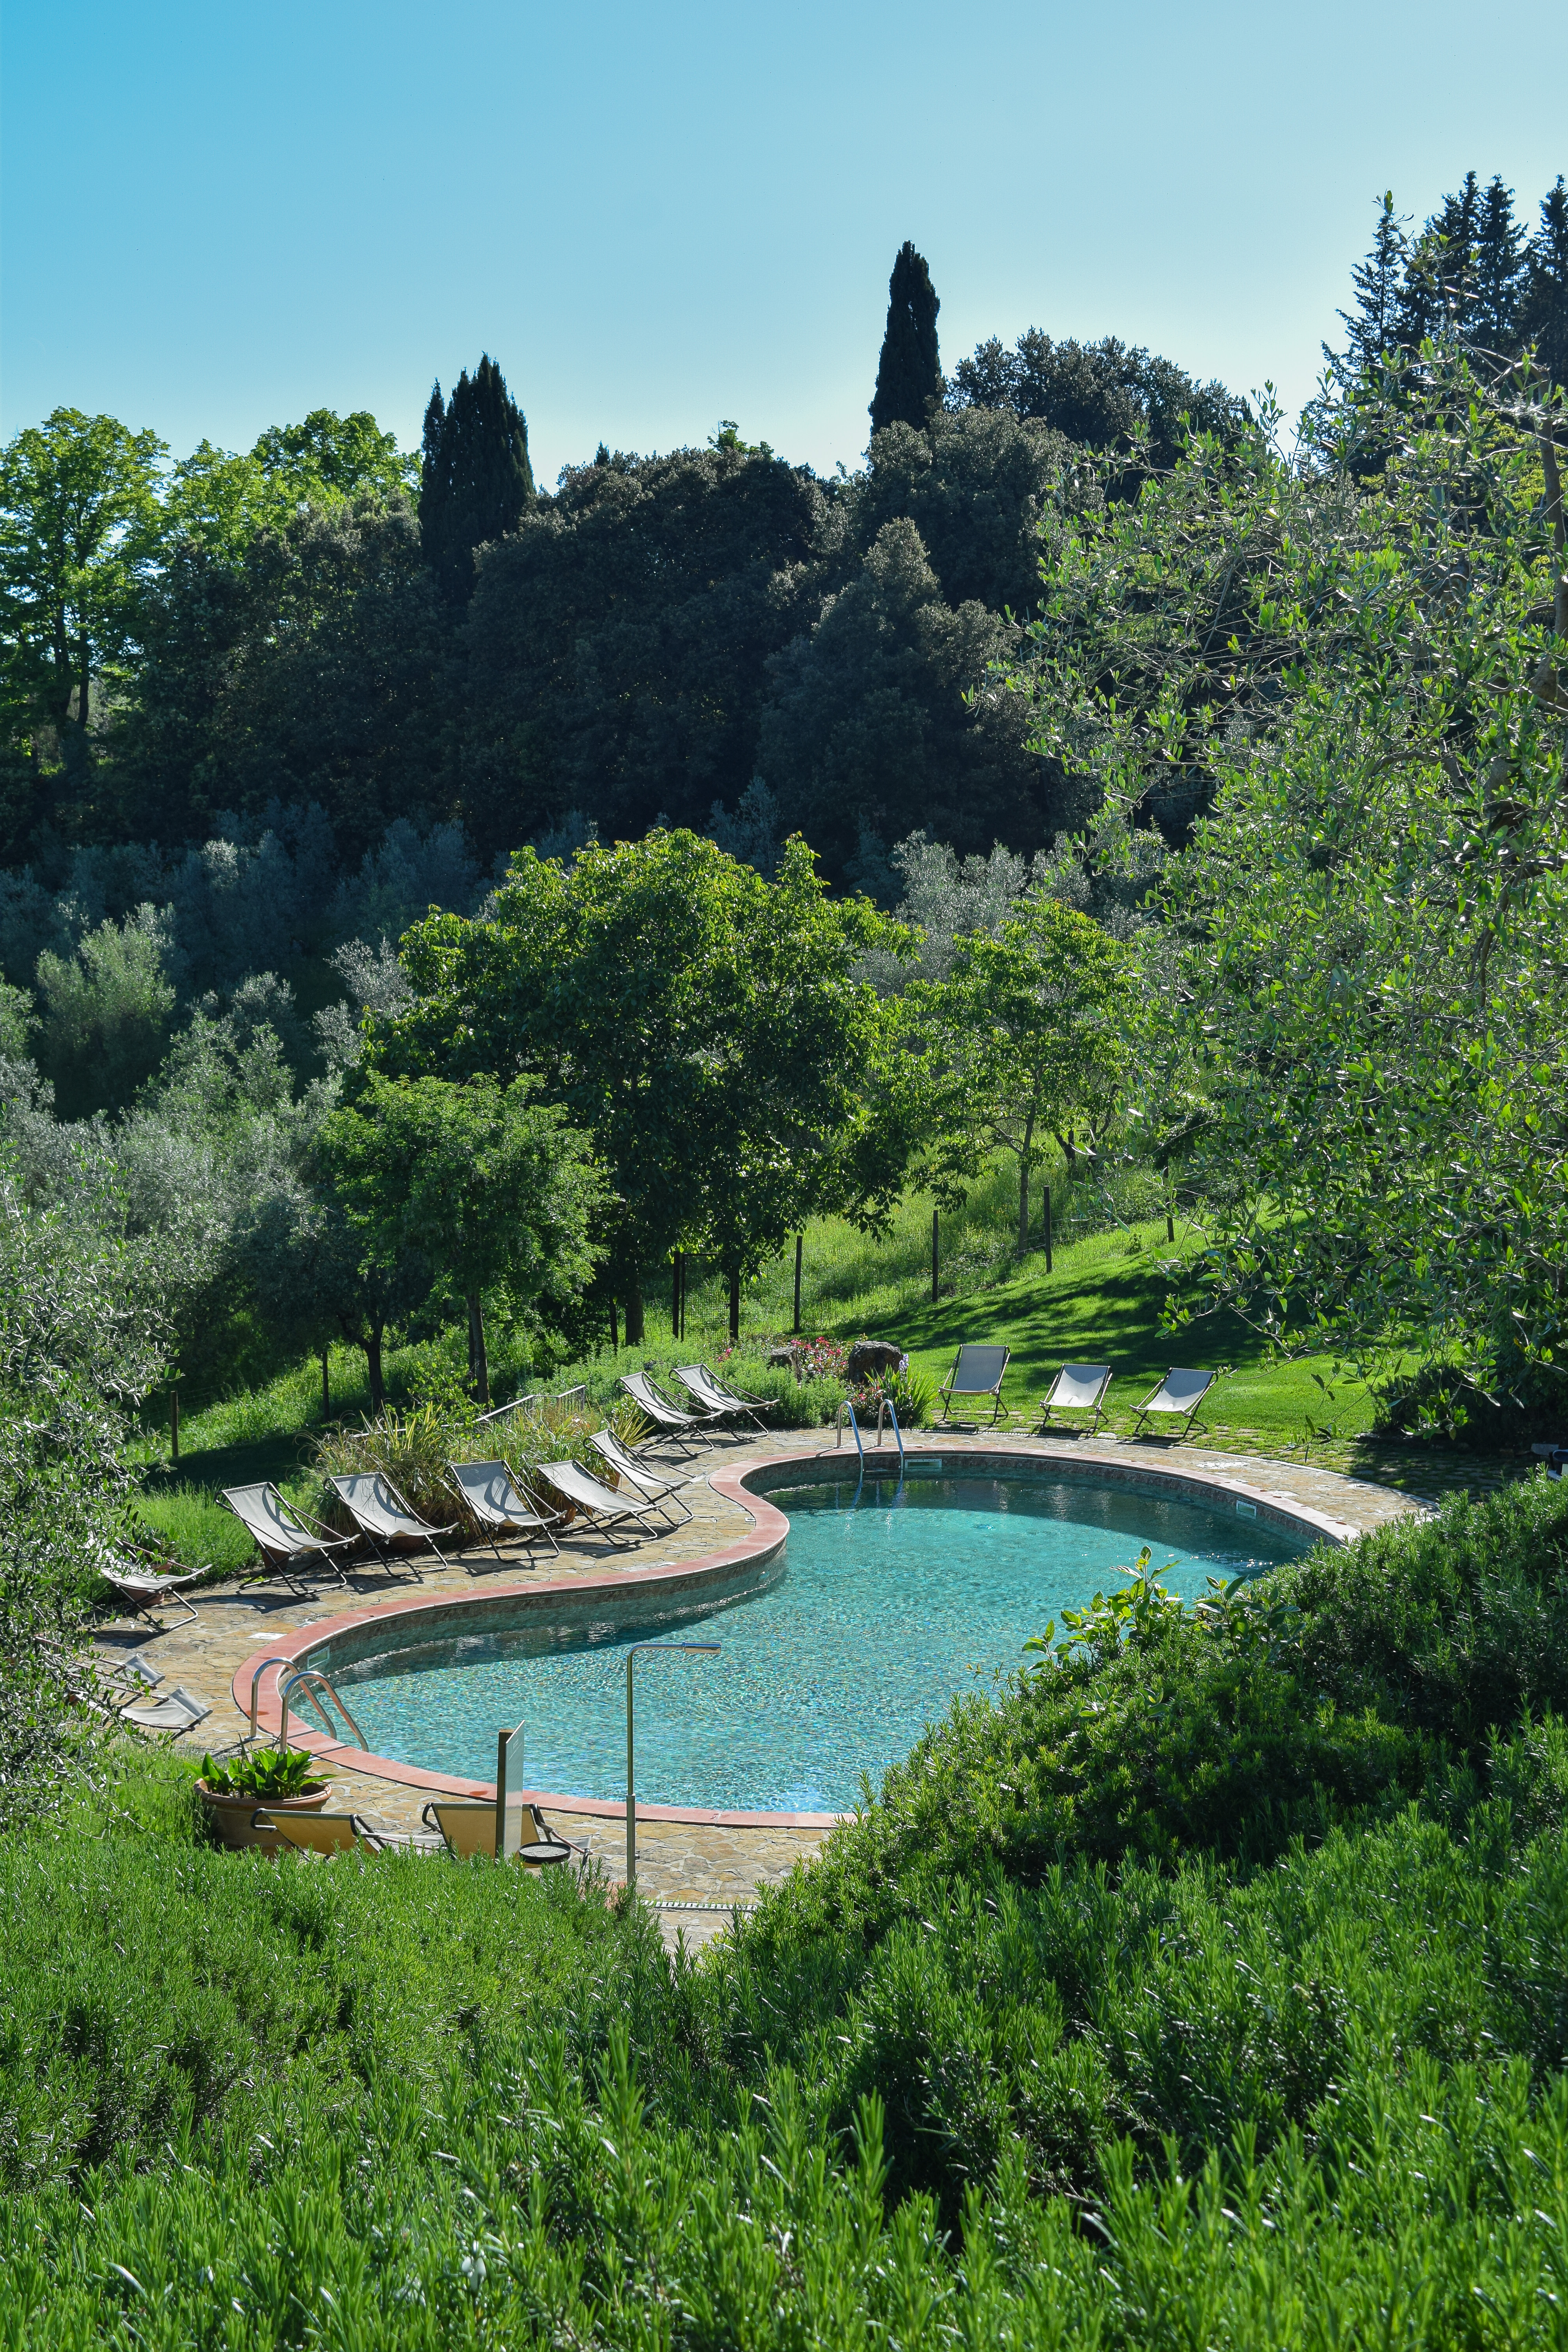 How to Spend A Weekend in Panzano in Chianti